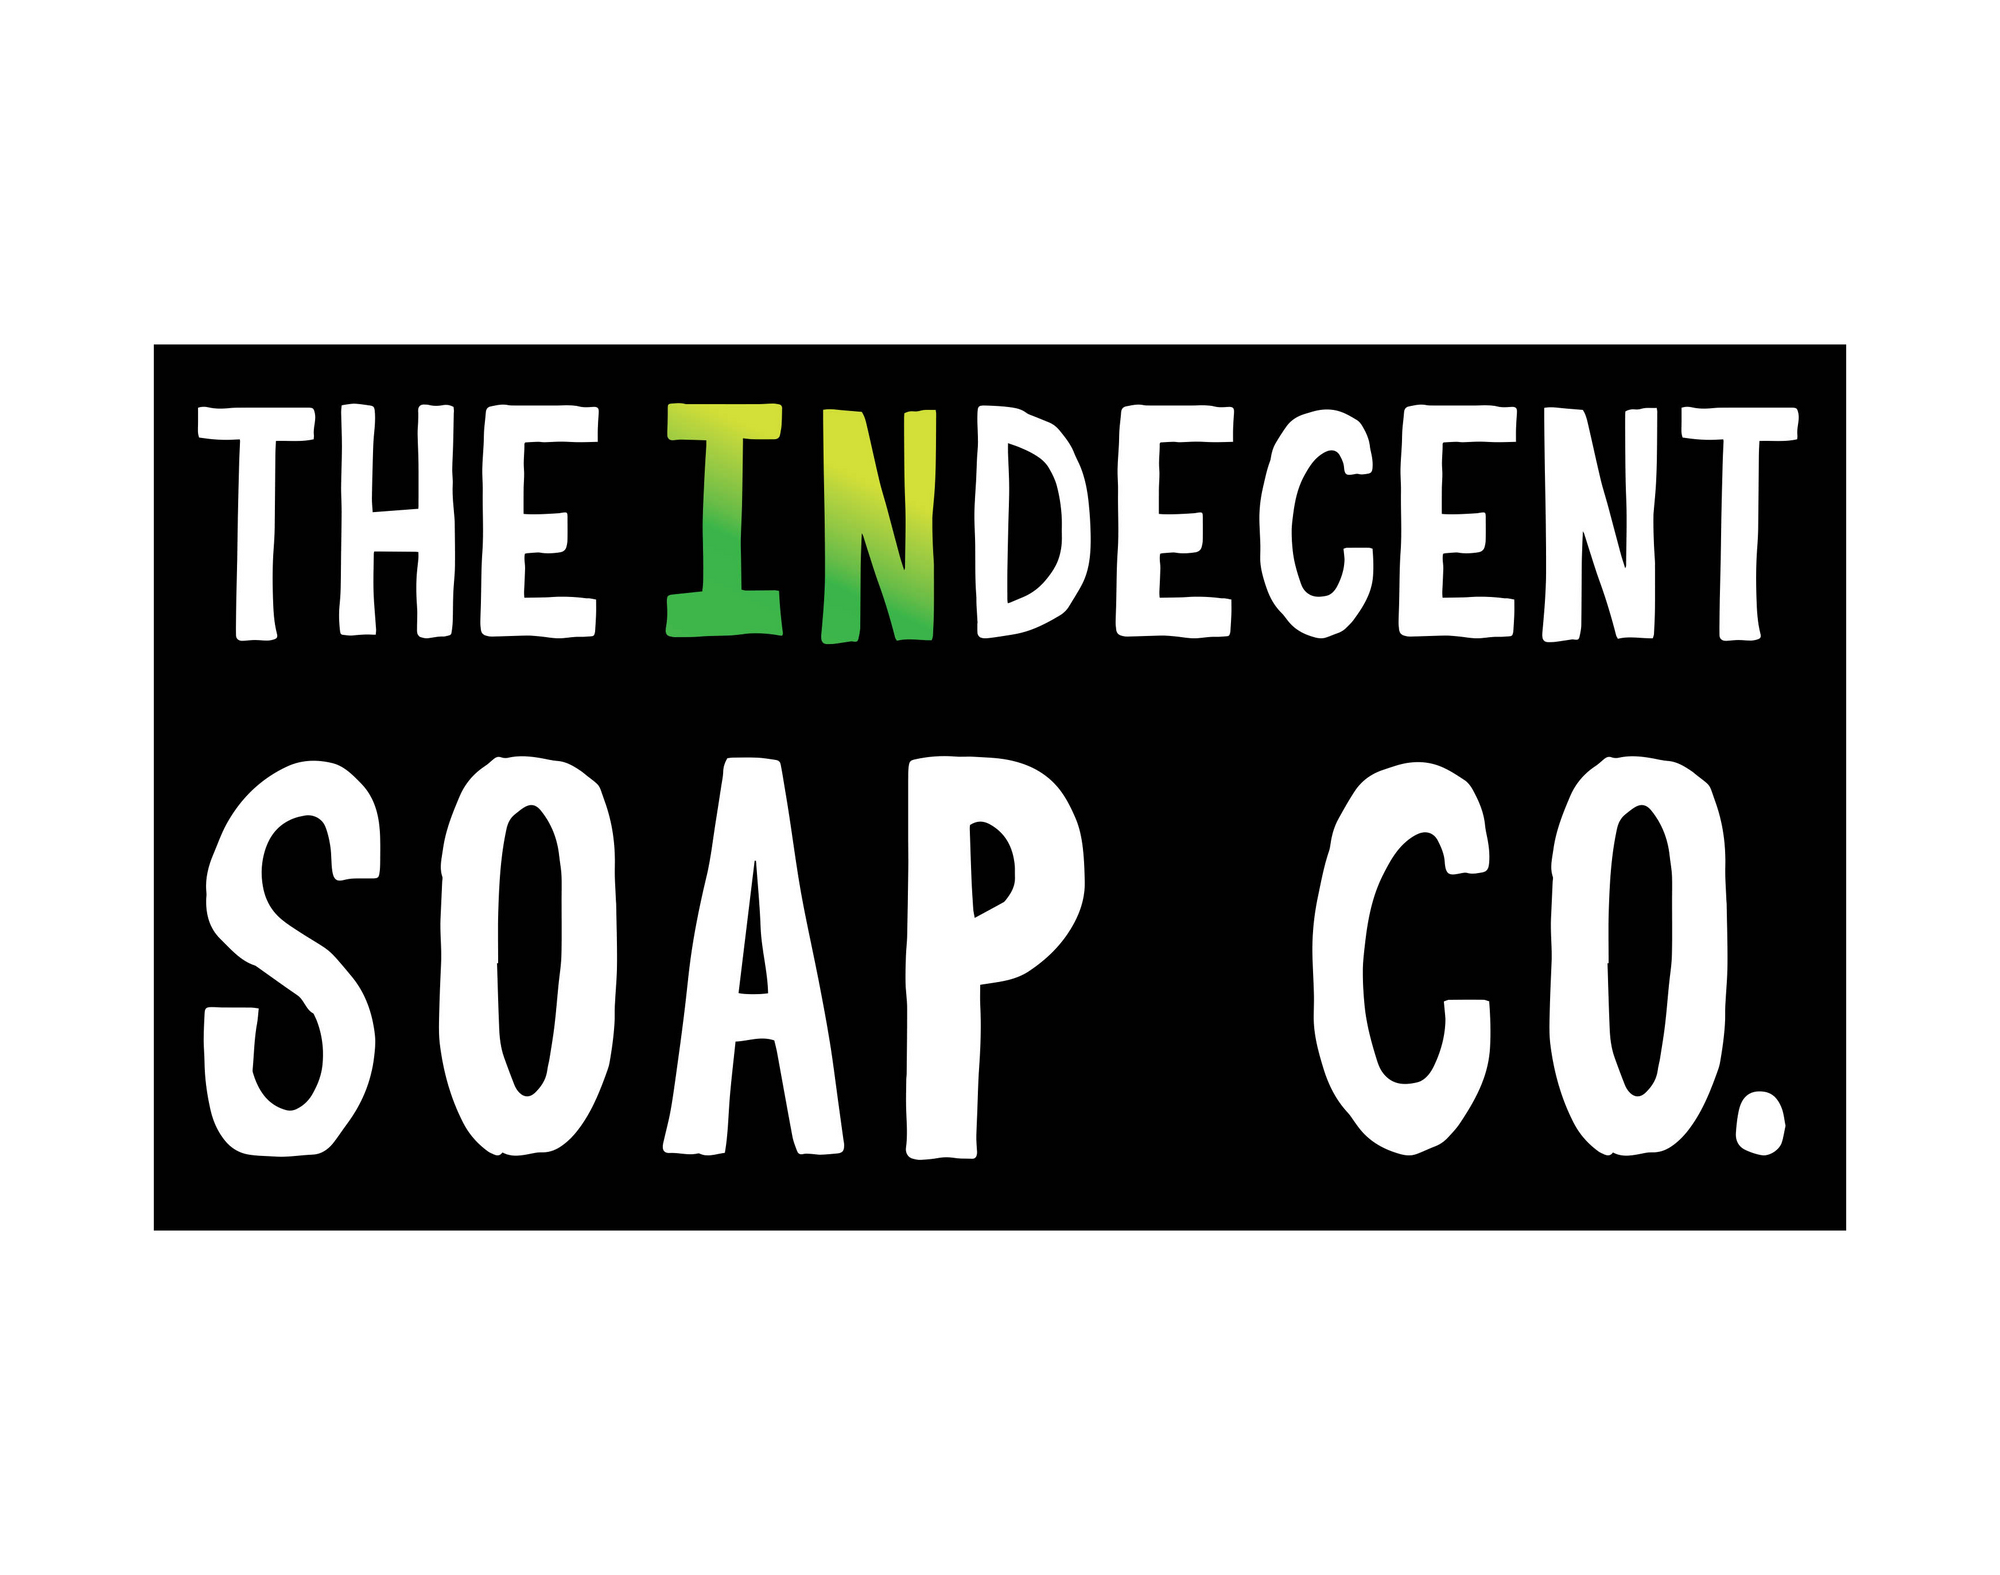 The Dirtiest Way to Get Clean! - The Indecent Soap Co